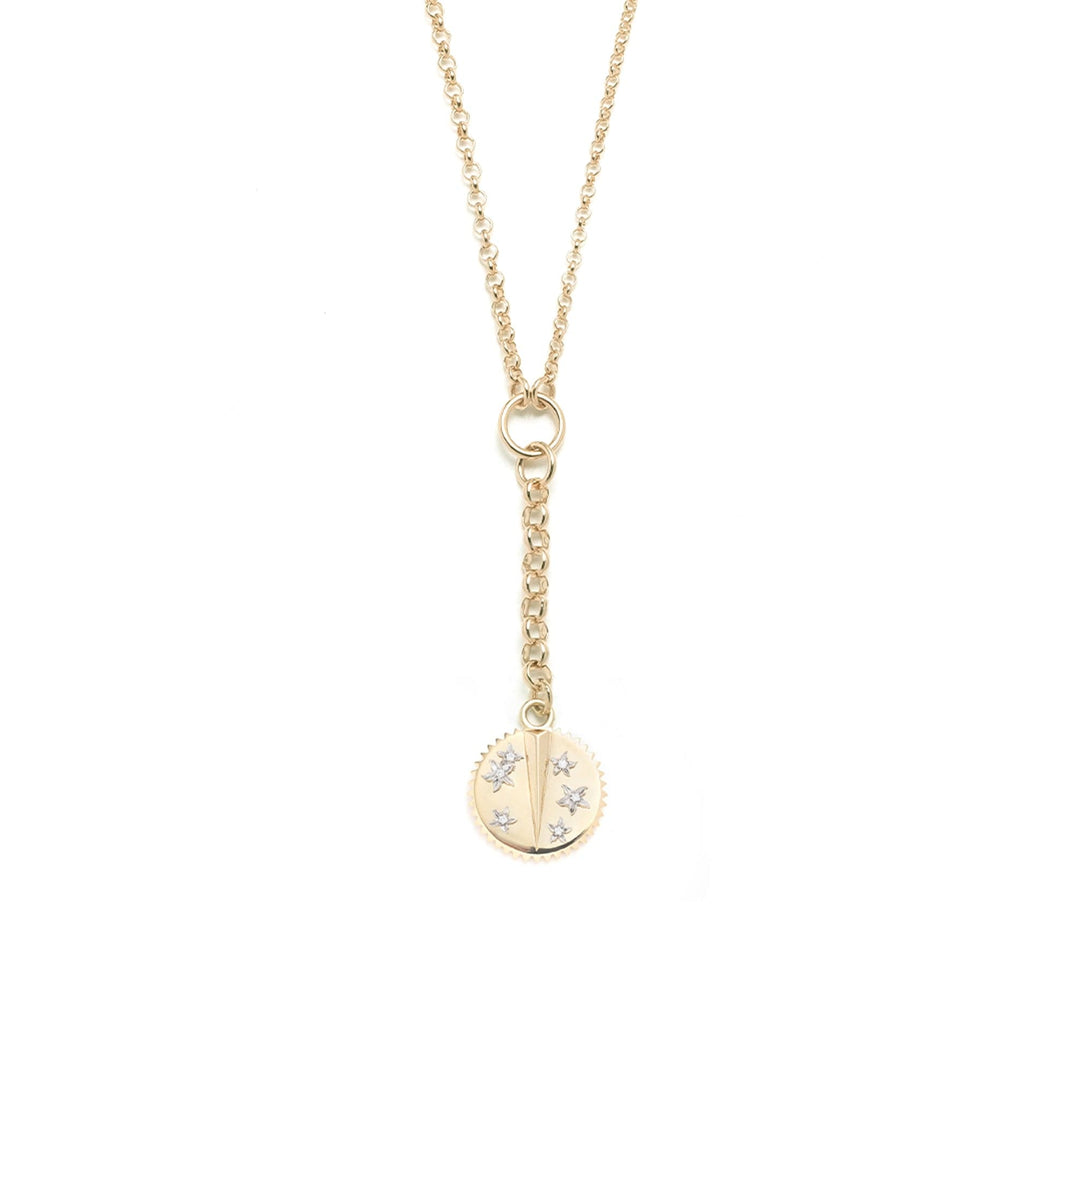 Foundrae | Spark Love Small Mixed Belcher Extension Chain Necklace 18K Yellow Gold Size 2mm